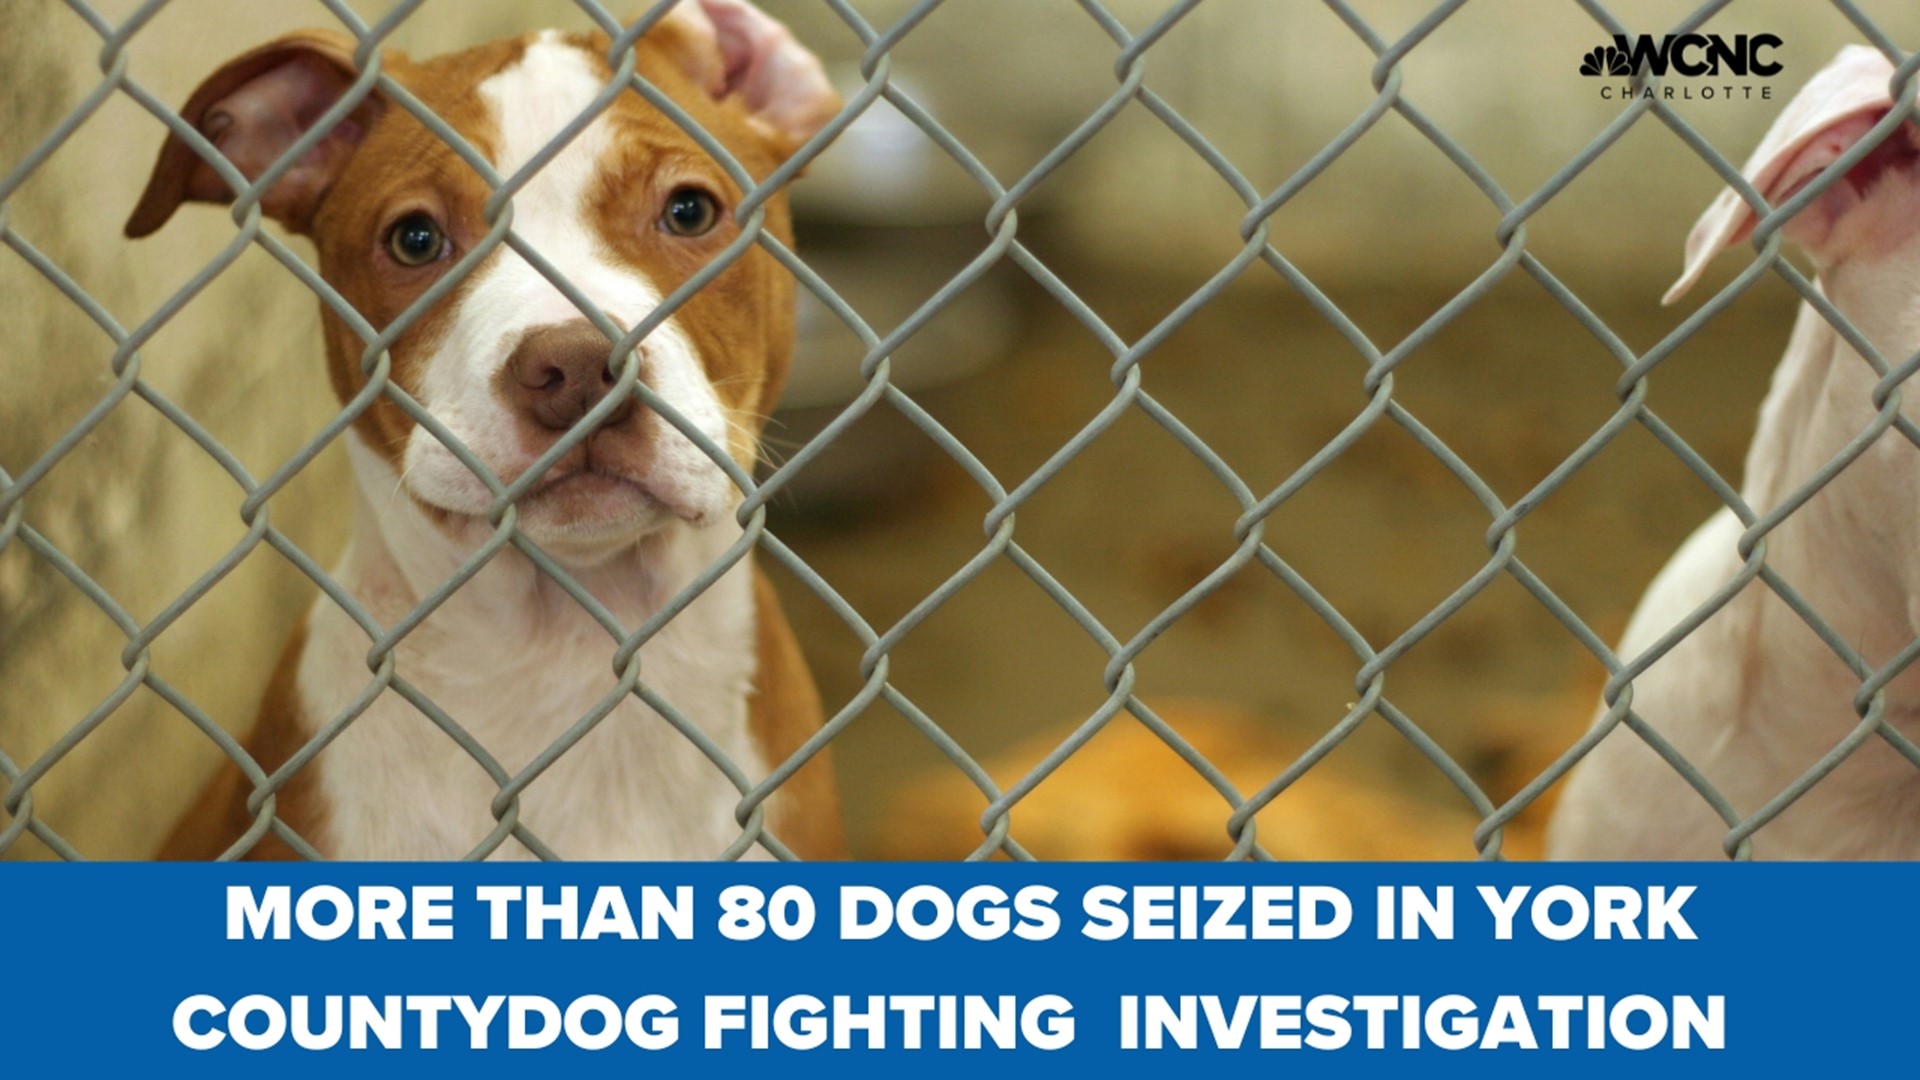 Dogs seized in York County from fighting ring following investigation